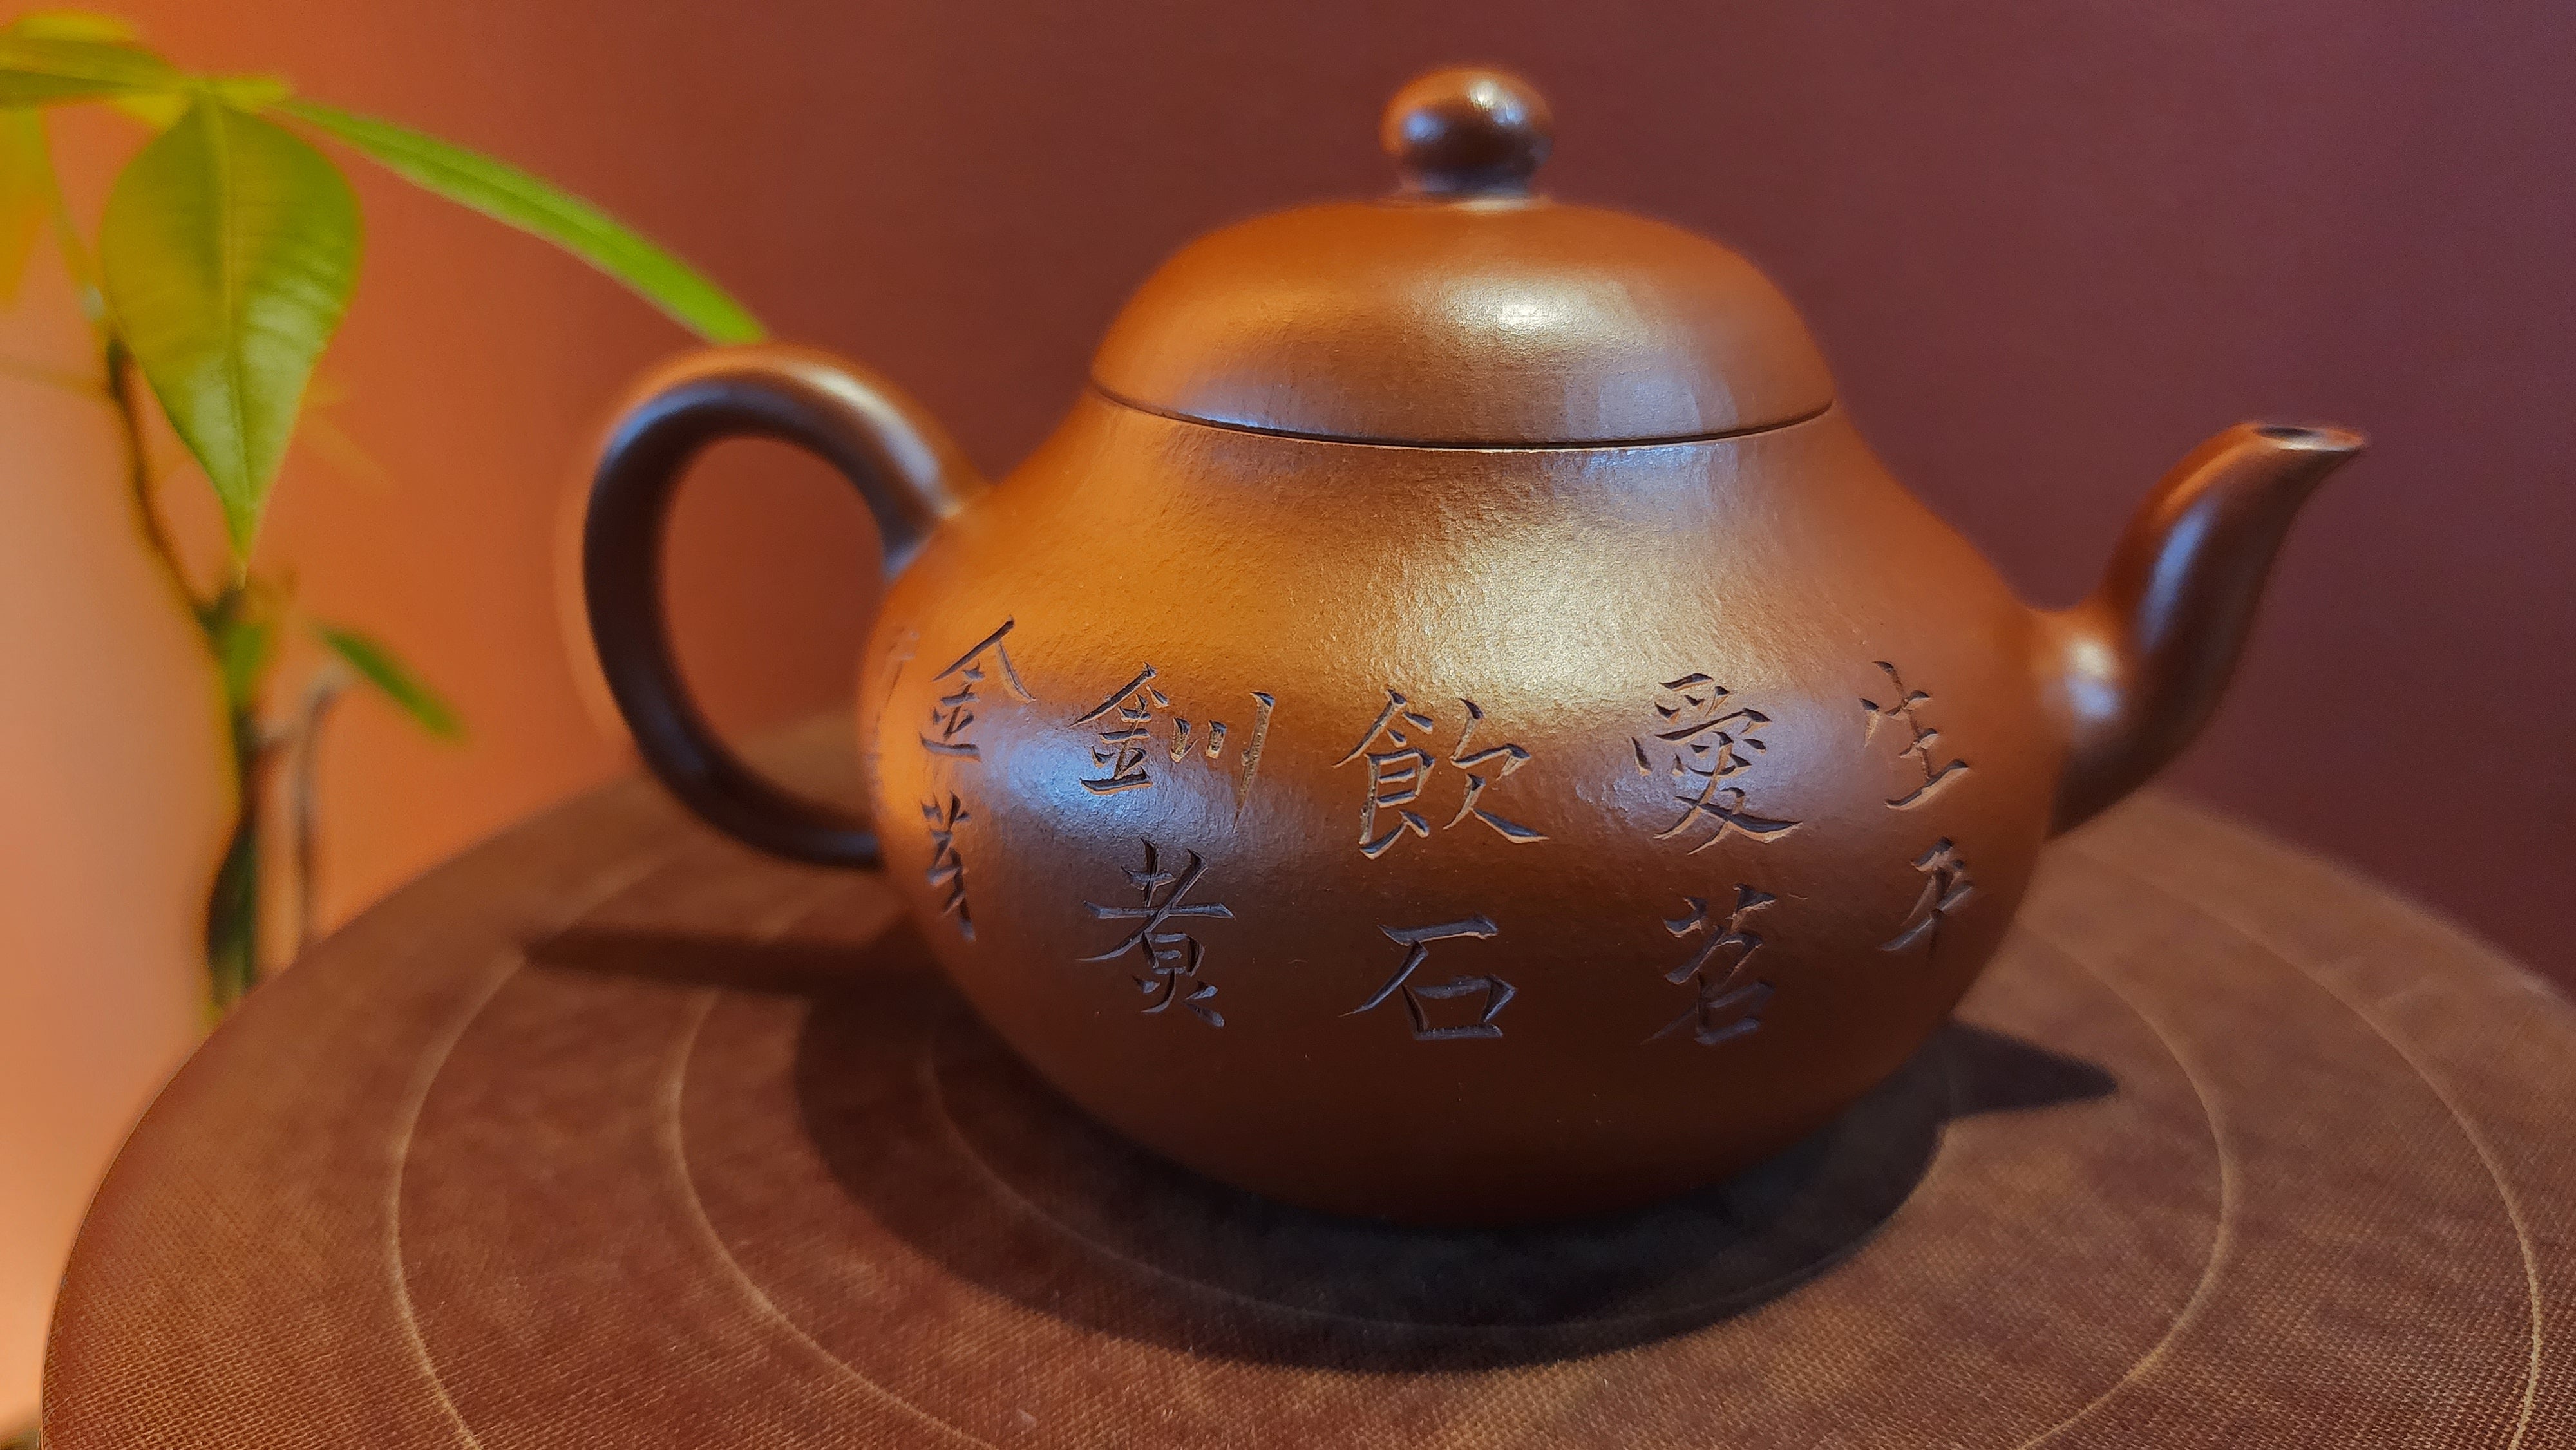 Li Xing 梨形, XiaoMeiYao ZhuNi 小煤窑朱泥, by our collaborative Craftsman Zhao Xiao Wei 赵小卫。Bamboo engraving and Calligraphy inscription by L4 Assoc Master Artist Xing Su 行素。135ml.